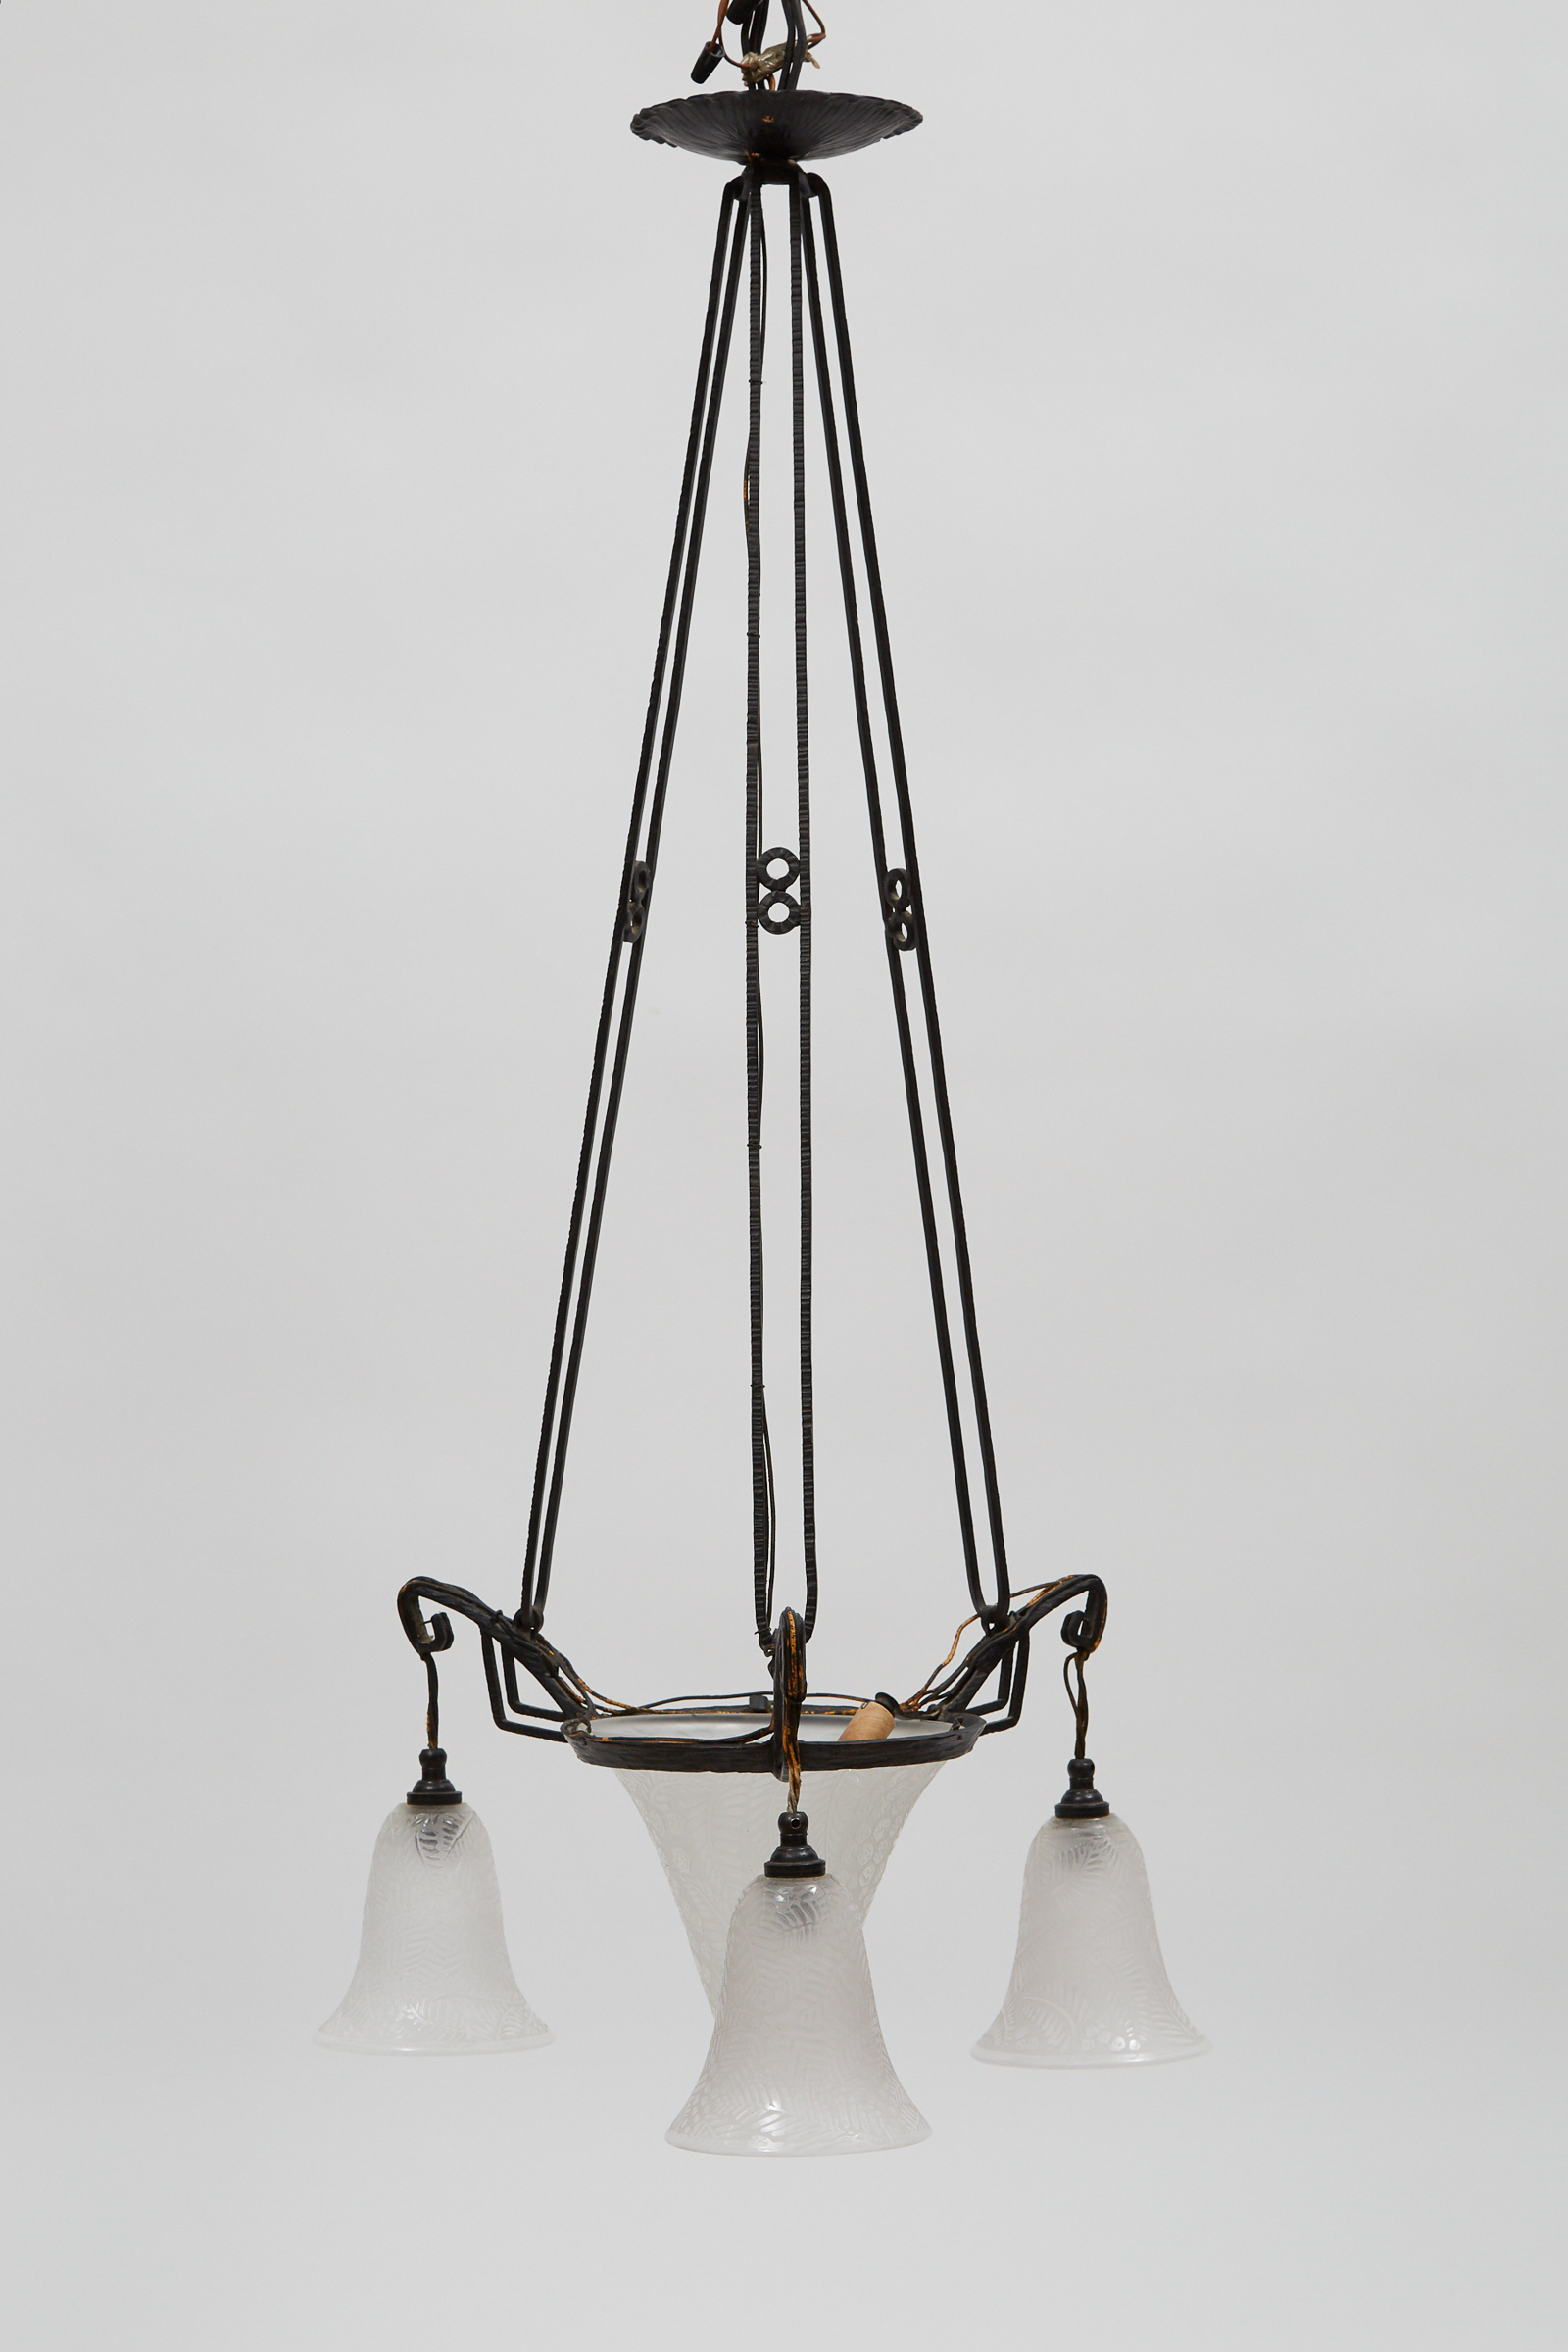 Müller Fréres, Lunéville, French Art Deco Wrought Iron and Etched Glass Chandelier, early 20th century